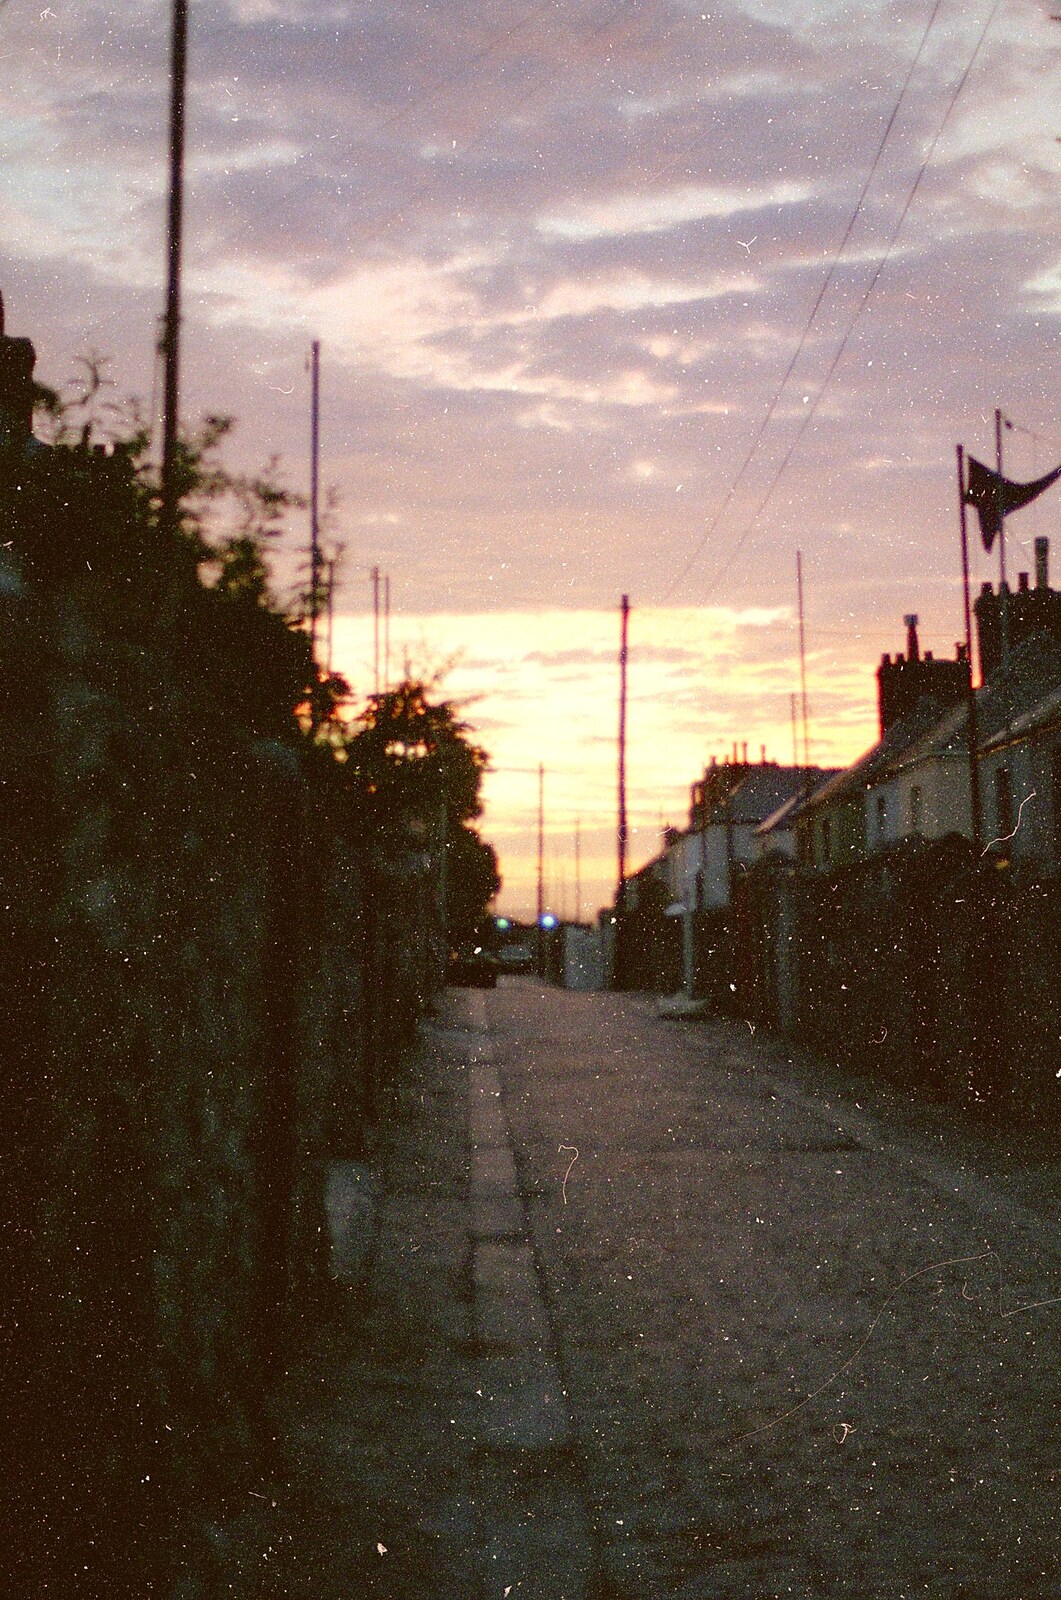 The back alley of Neath Road from Uni: A Neath Road Summer, St. Jude's, Plymouth - 18th August 1987